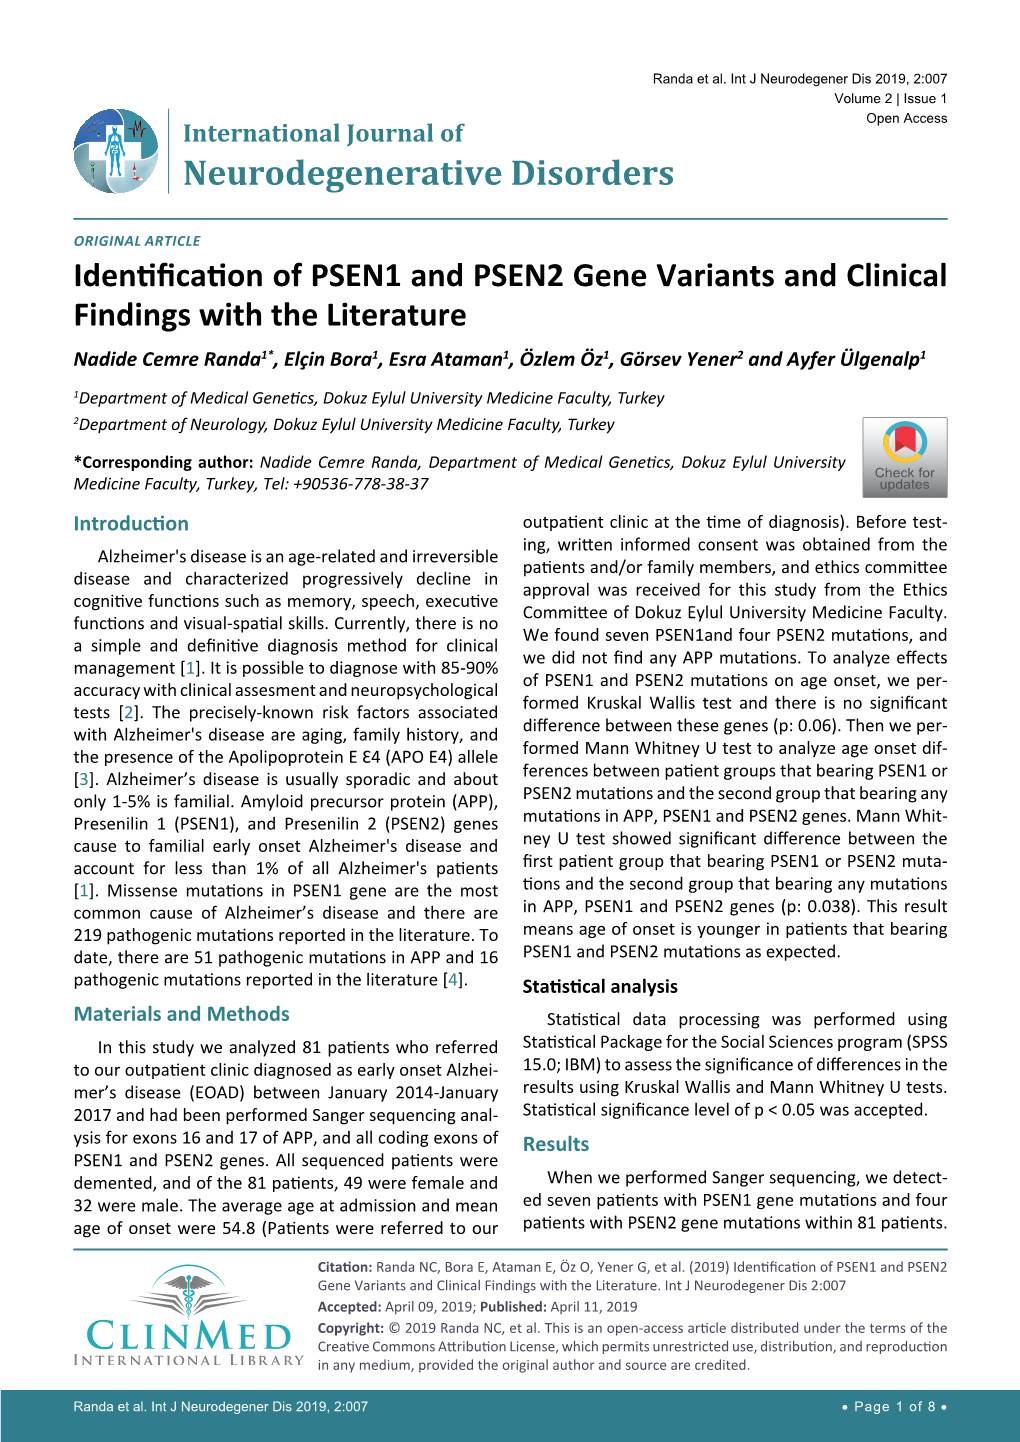 Identification of PSEN1 and PSEN2 Gene Variants and Clinical